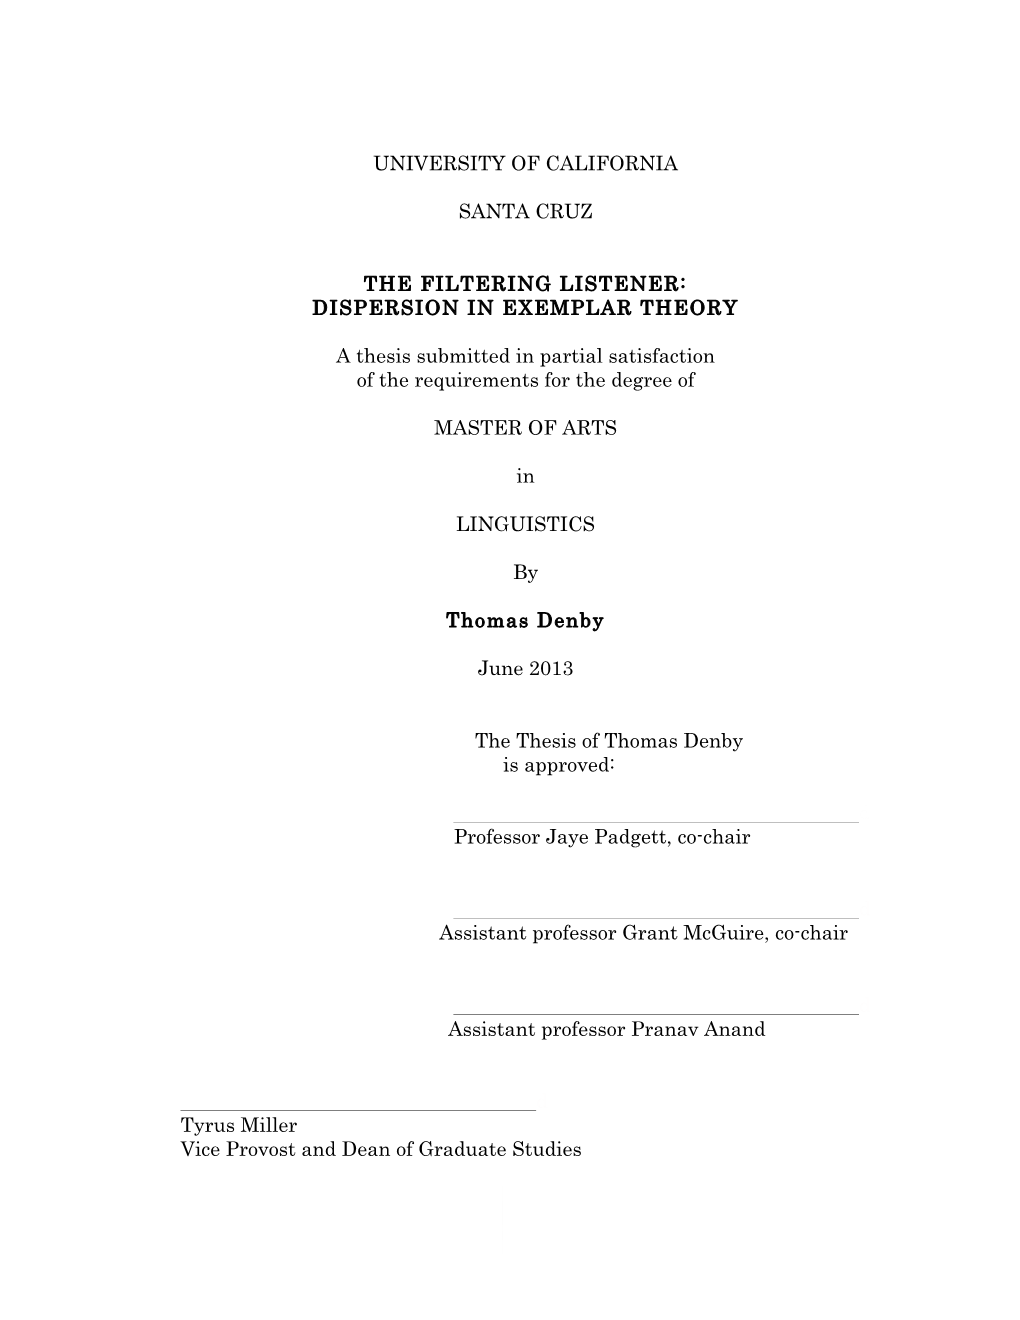 DISPERSION in EXEMPLAR THEORY a Thesis Submitted In